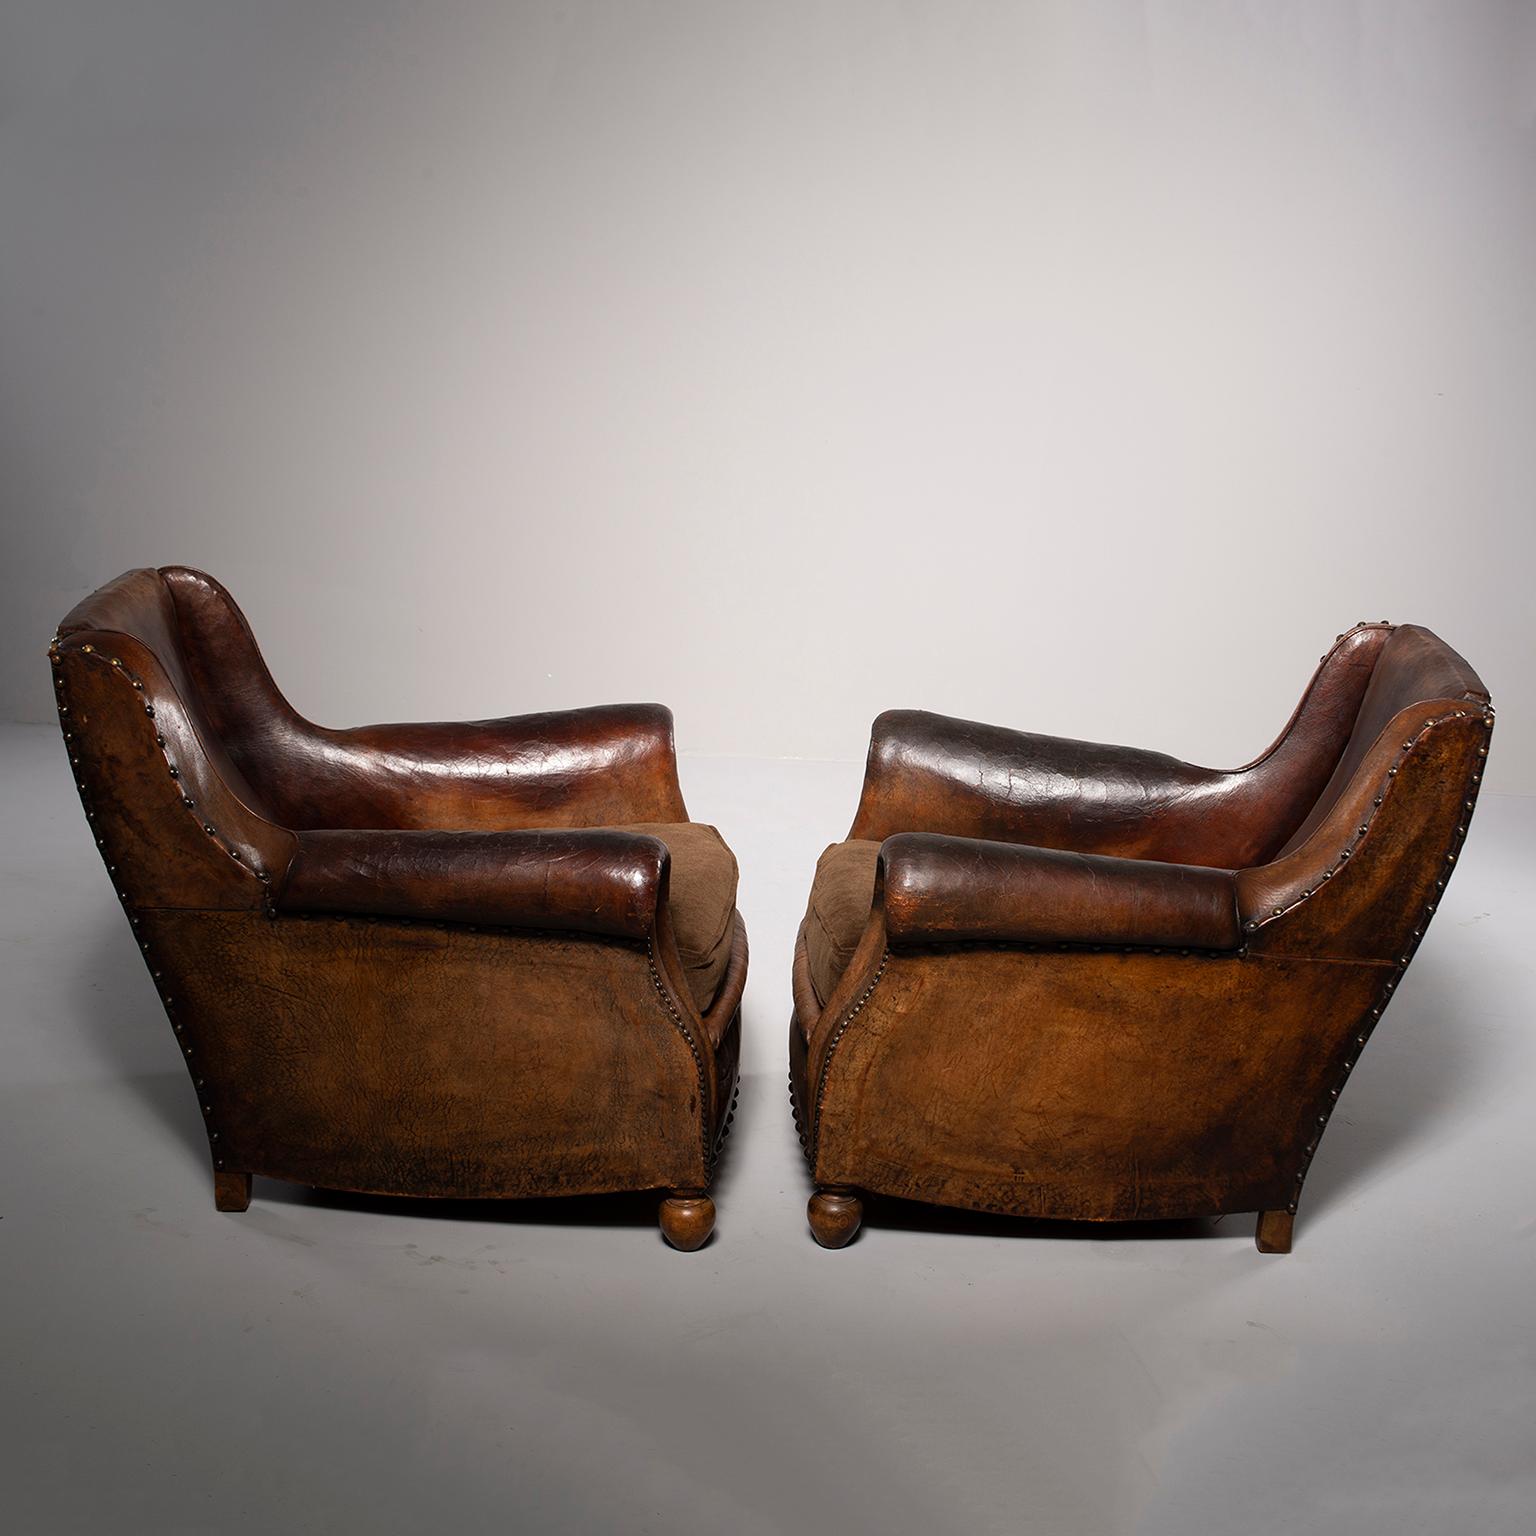 French Pair of Art Deco Leather Chairs with Alpaca Velvet Seats